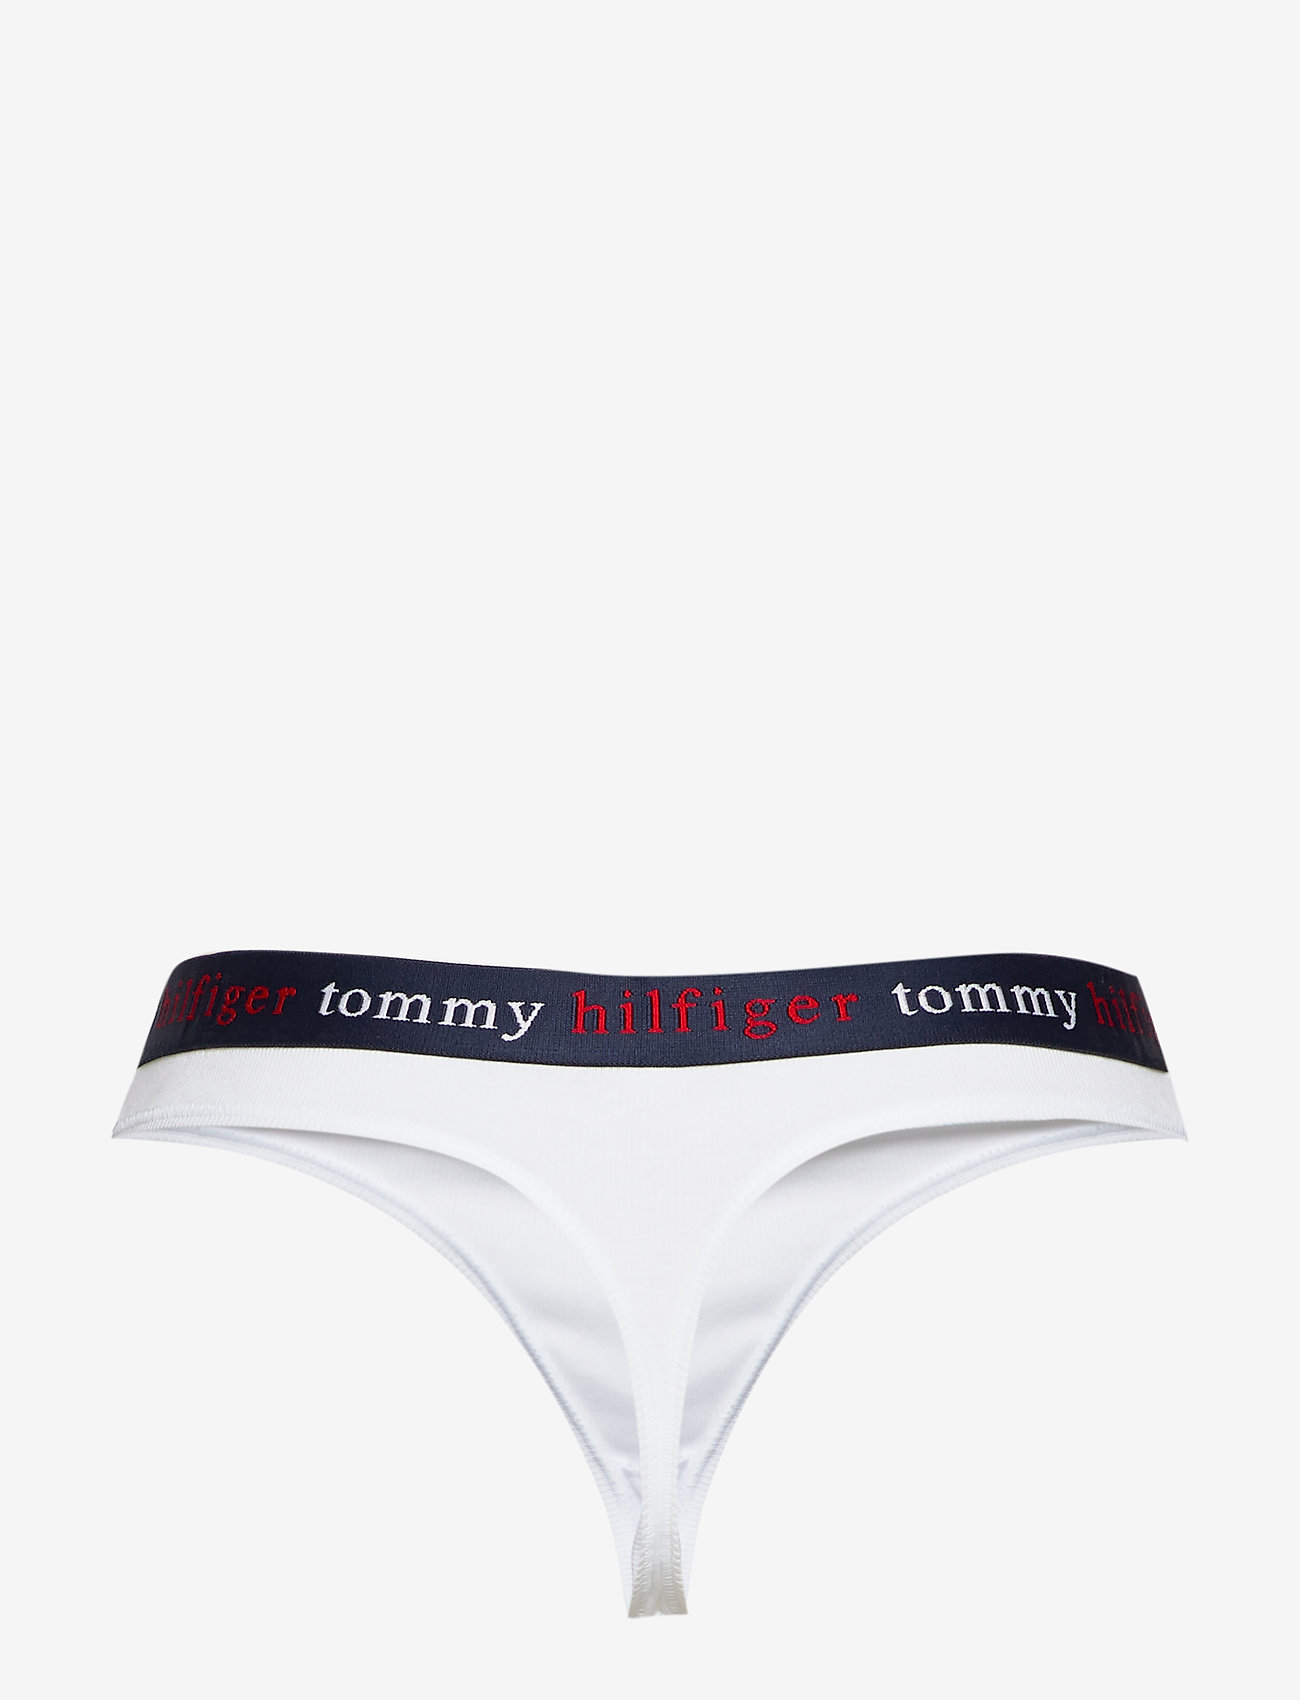 tommy hilfiger white thong